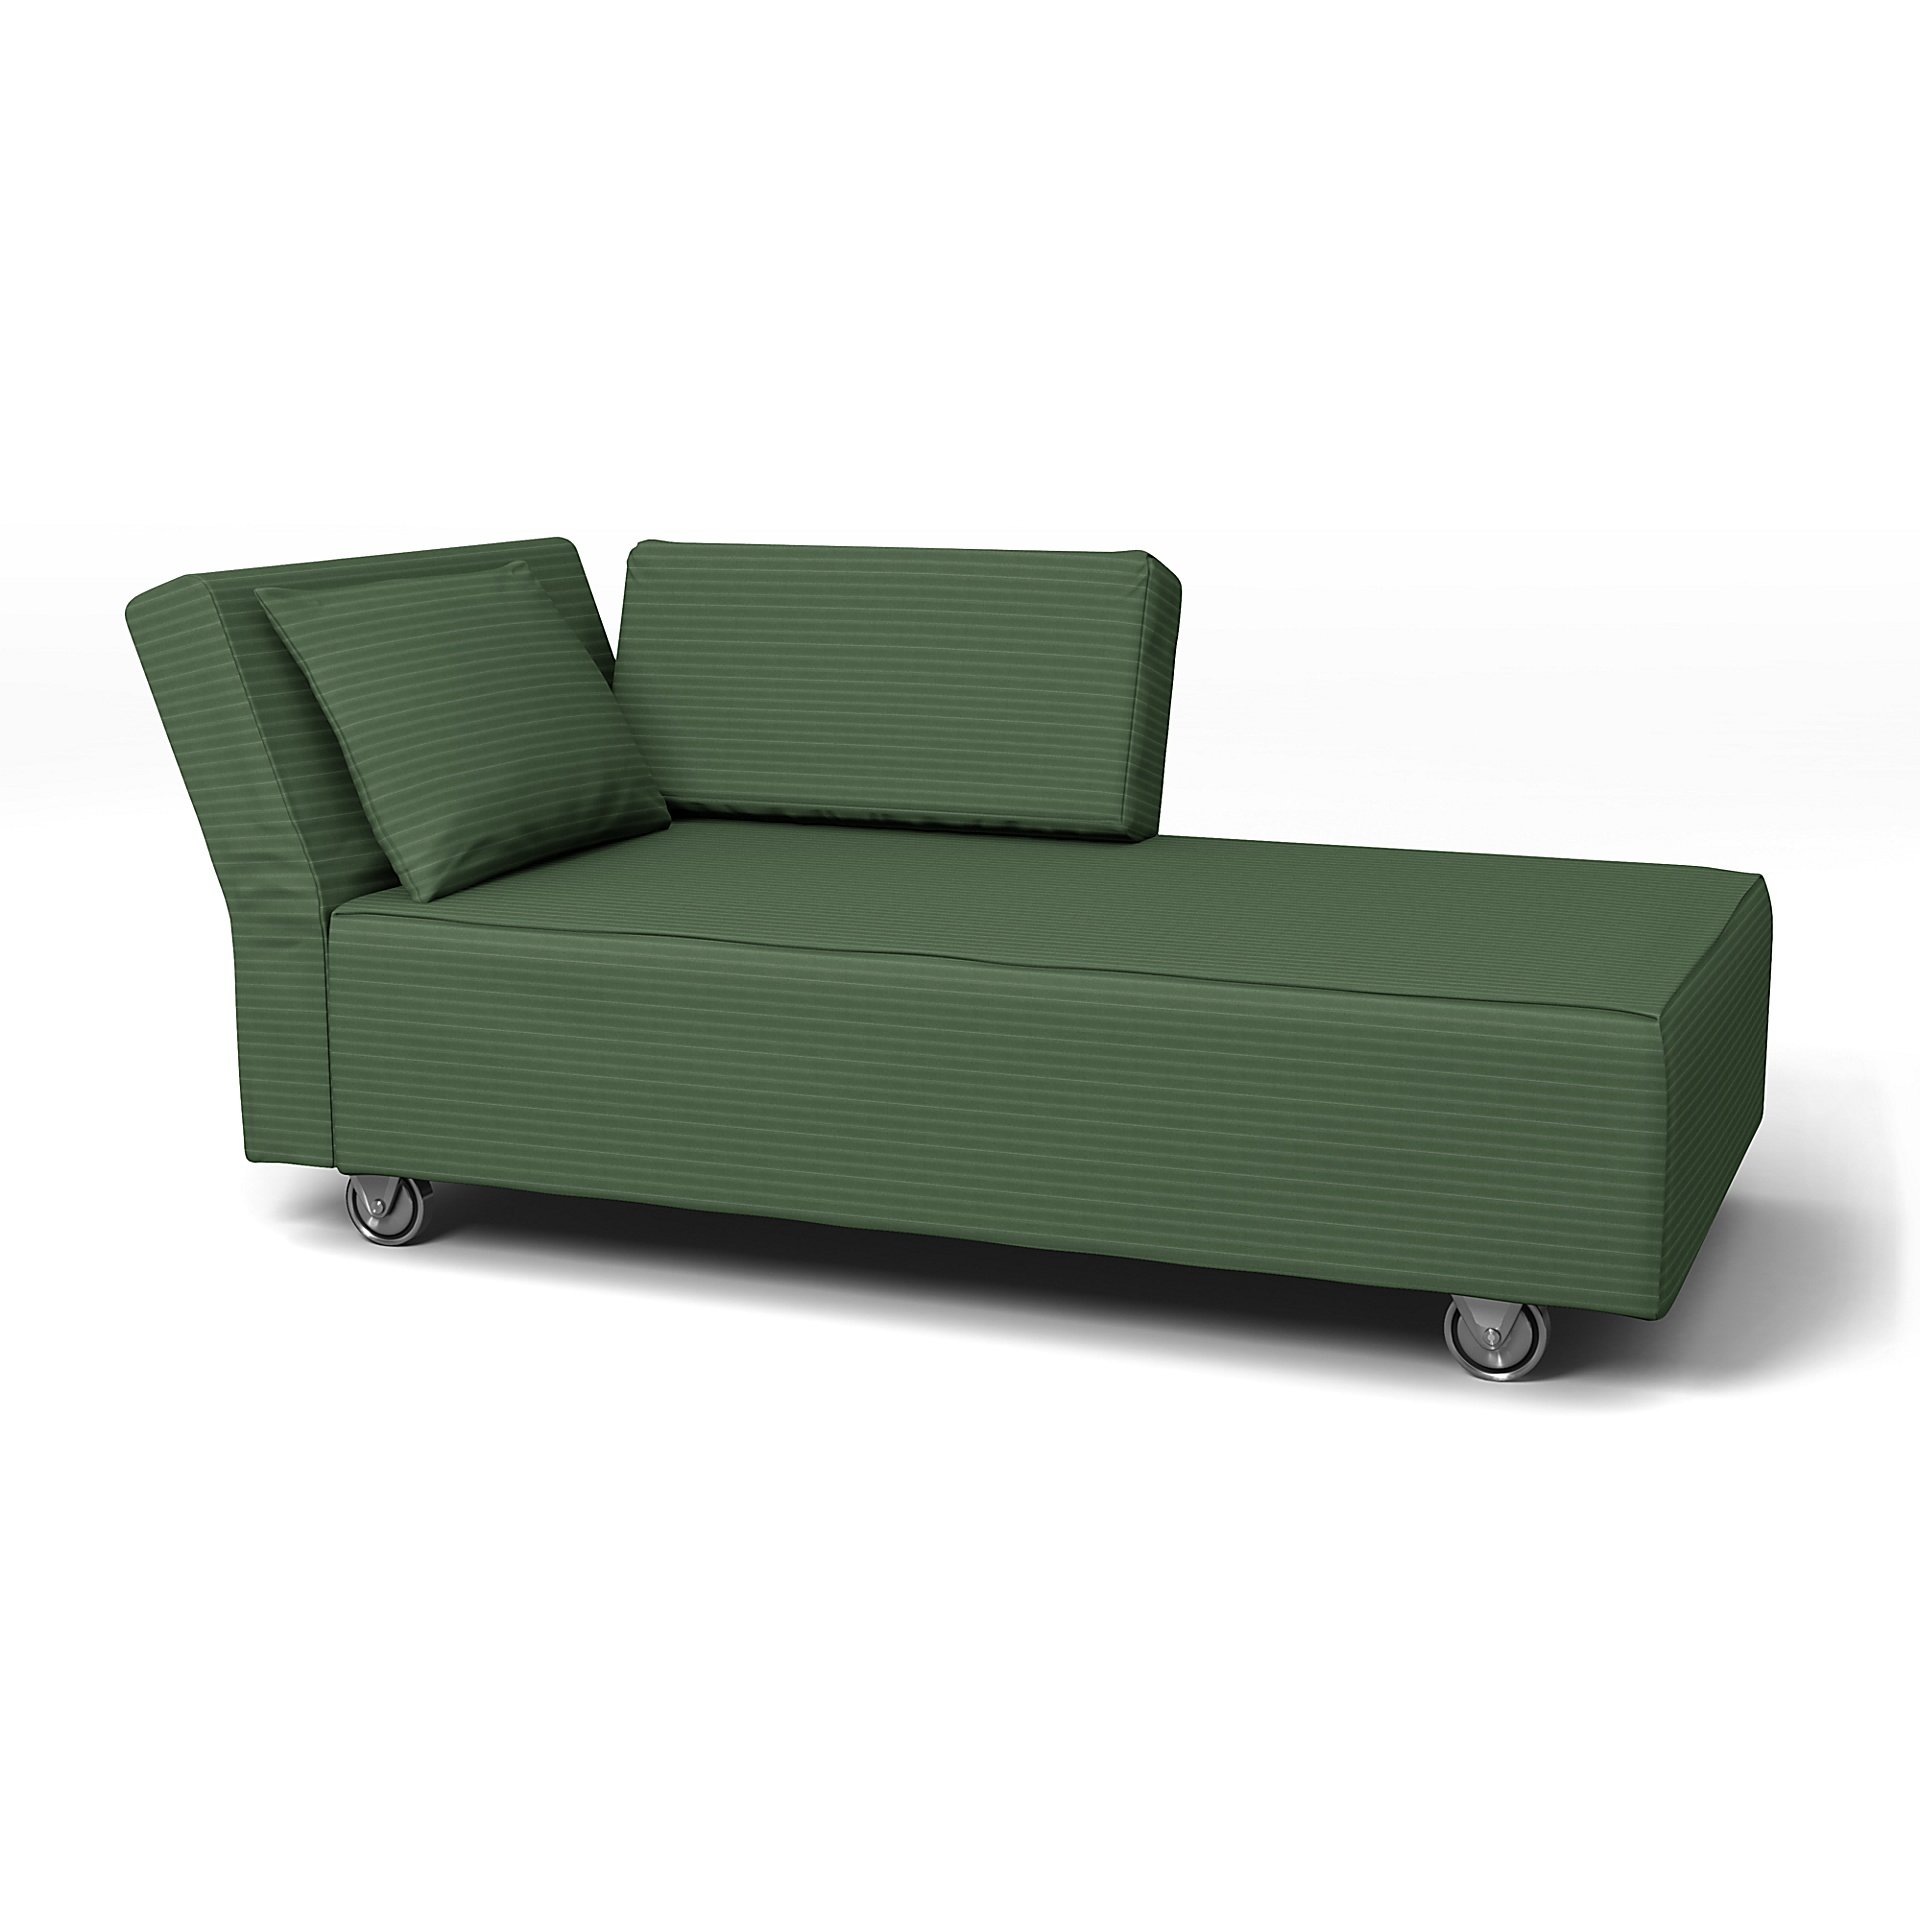 IKEA - Falsterbo Chaise with Left Armrest Cover, Palm Green, Corduroy - Bemz